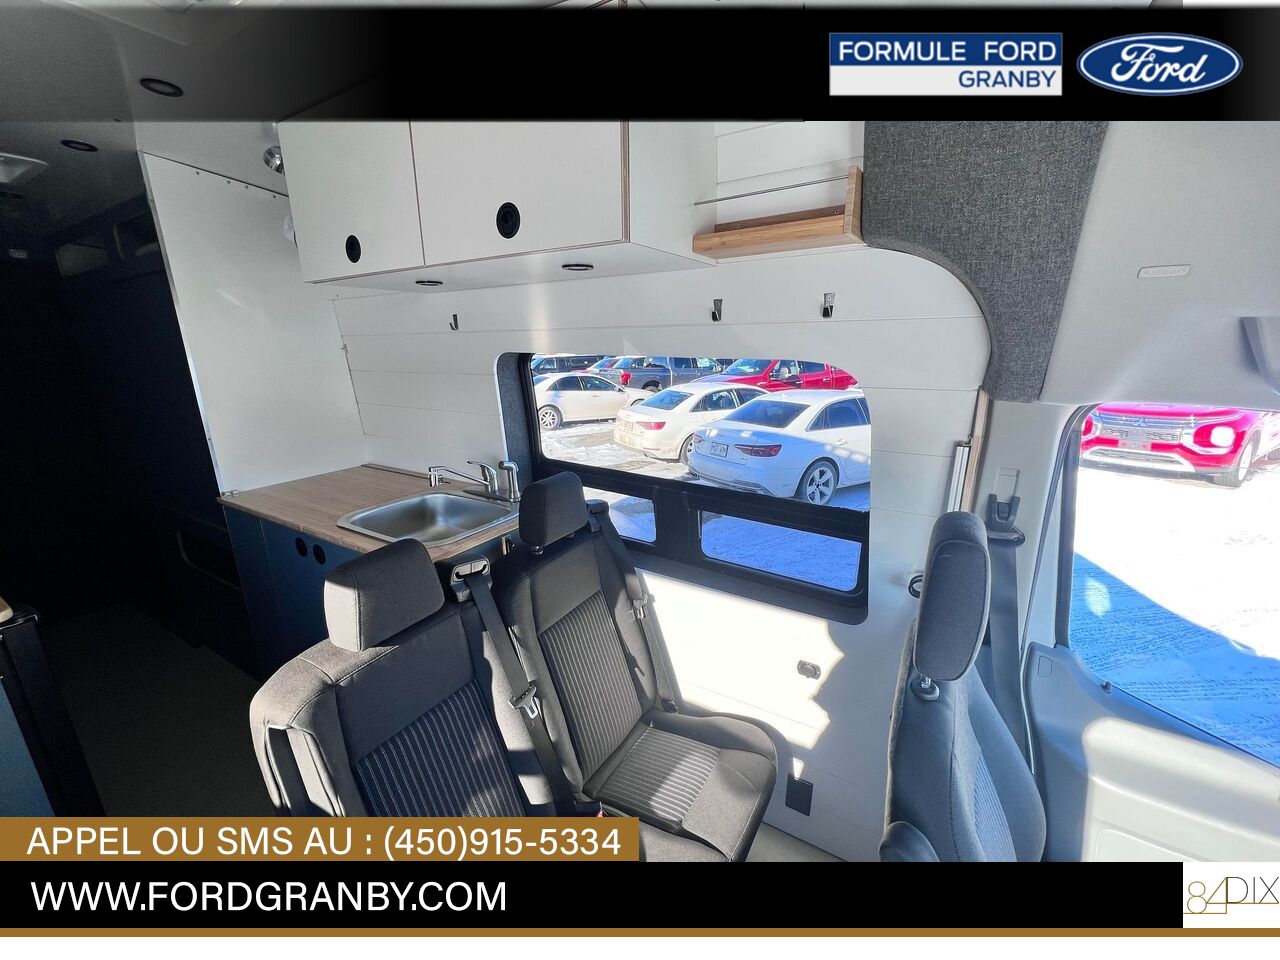 2019 Ford Transit fourgon utilitaire Granby - photo #22